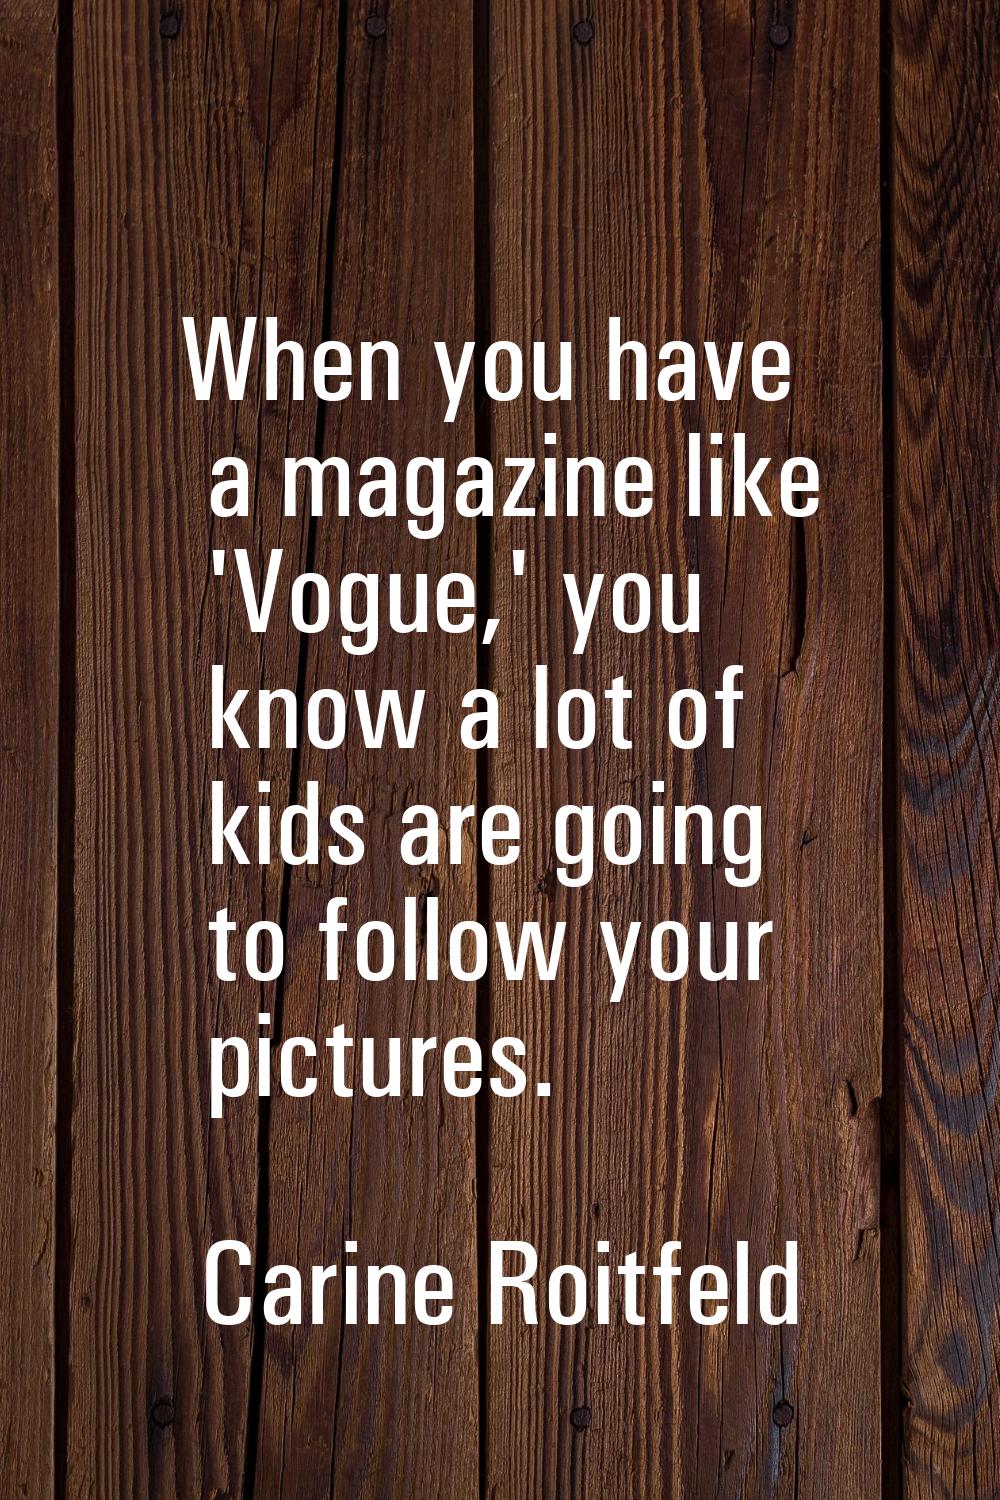 When you have a magazine like 'Vogue,' you know a lot of kids are going to follow your pictures.